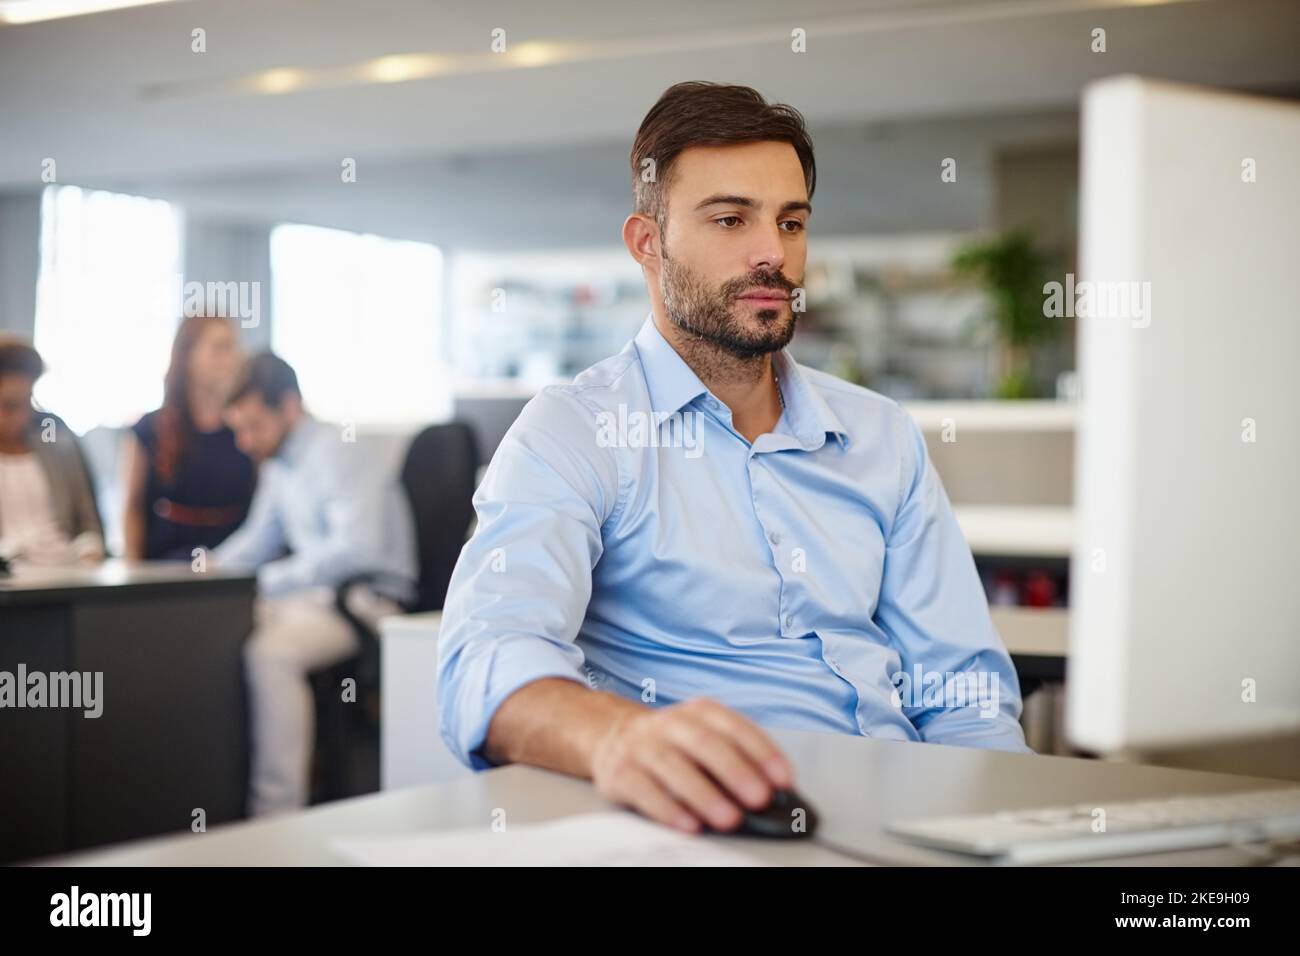 Work is where youre logged on. a businessman using a computer at his work desk. Stock Photo